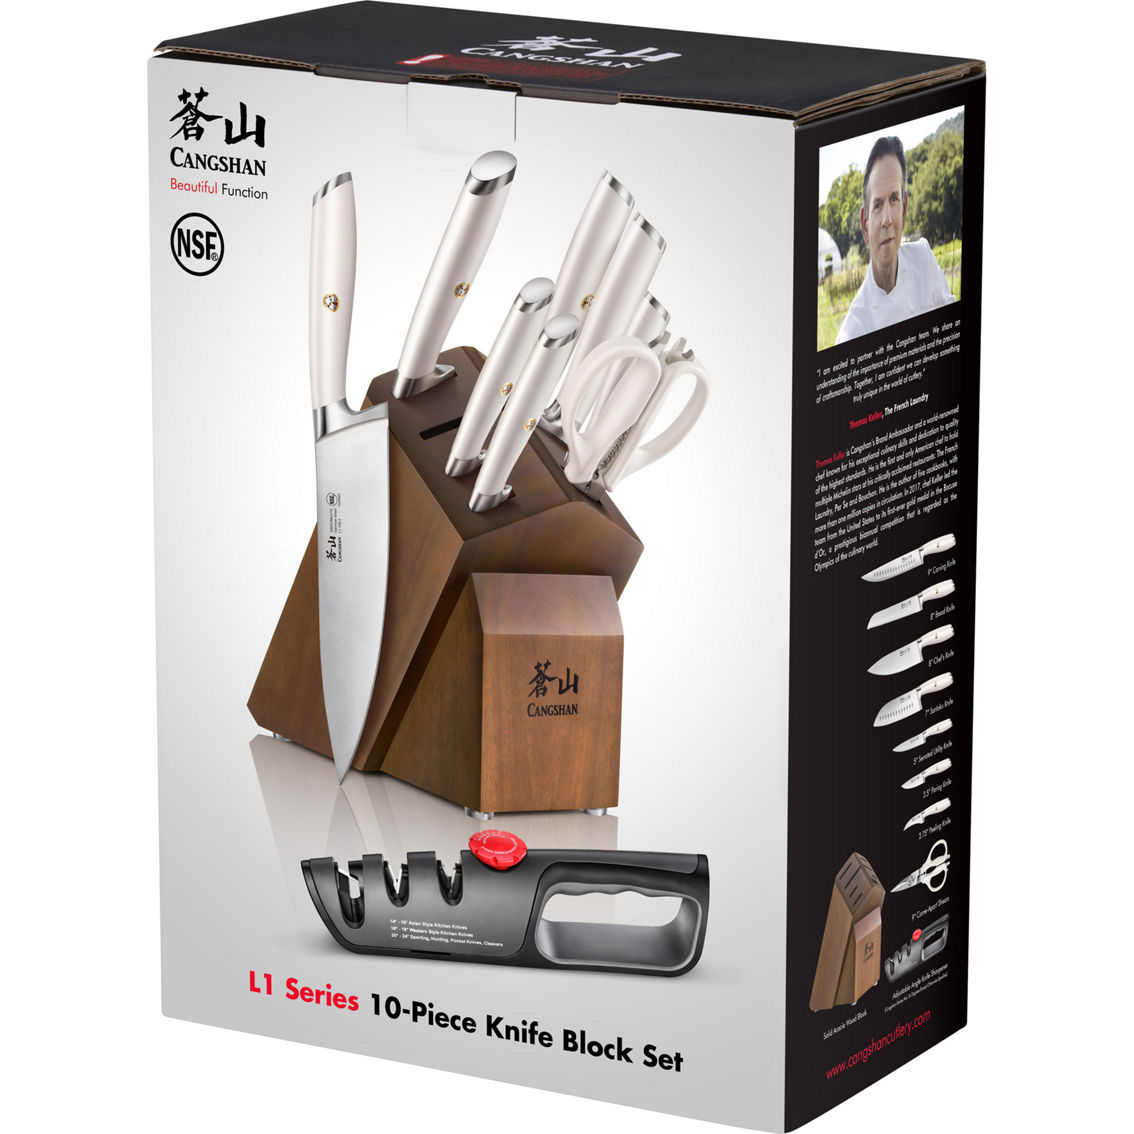 Cangshan Cutlery L1 Series White 10 pc. Forged Knife Block Set - Image 2 of 6